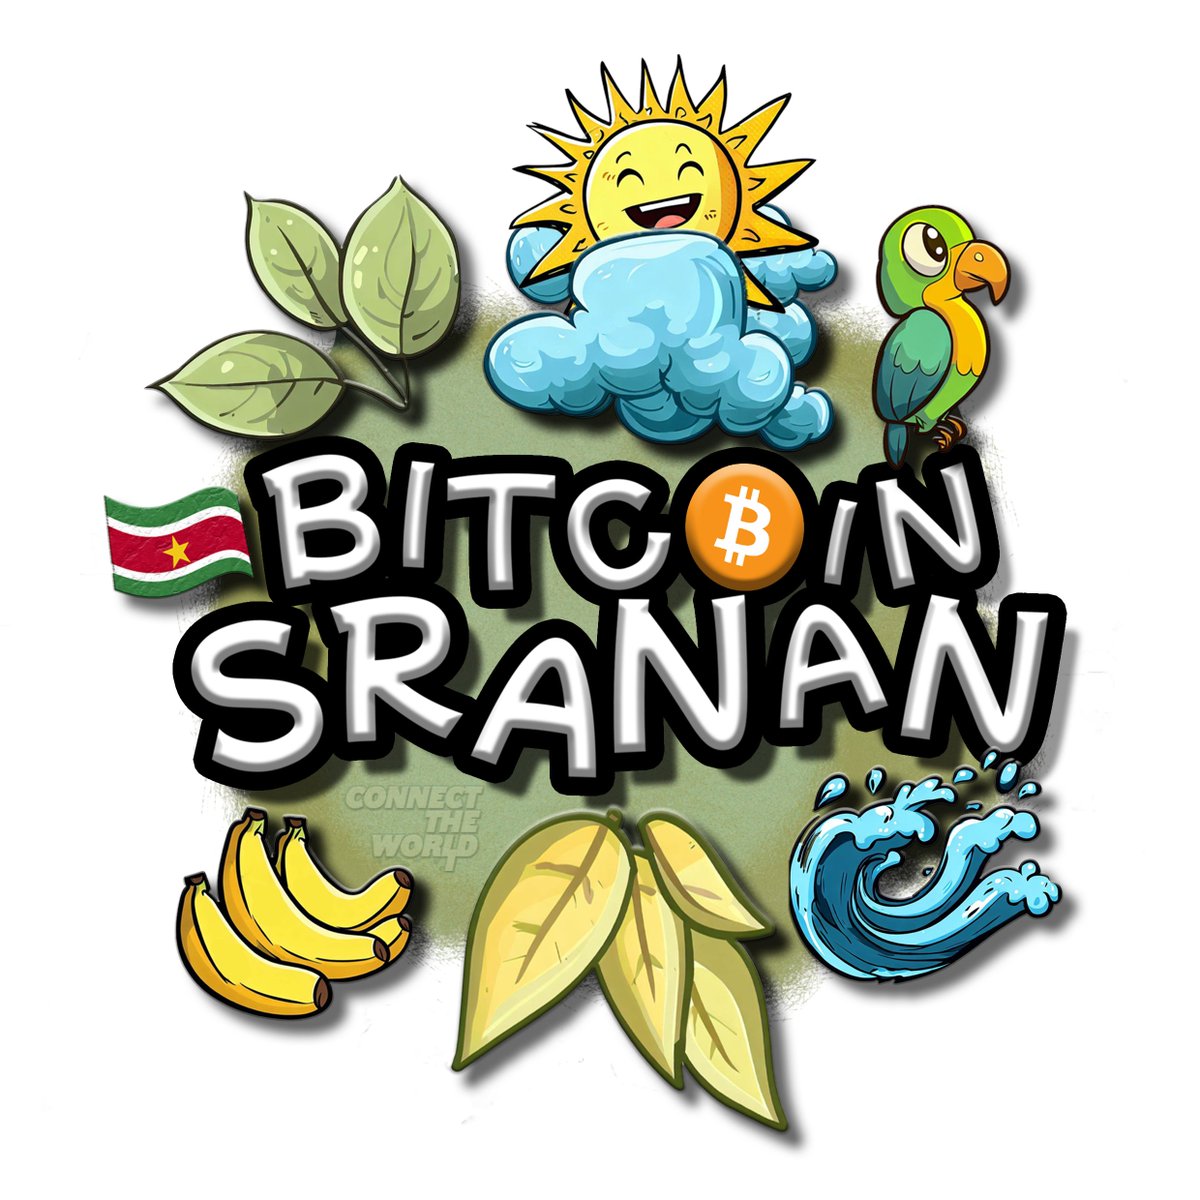 🌟 Exciting news! Introducing Bitcoin Sranan, a groundbreaking project aiming to establish a circular economy in Suriname using #bitcoin and the lightning network. Join us in shaping a future of innovation, financial freedom, and sustainability. #BitcoinSranan #connecttheworld